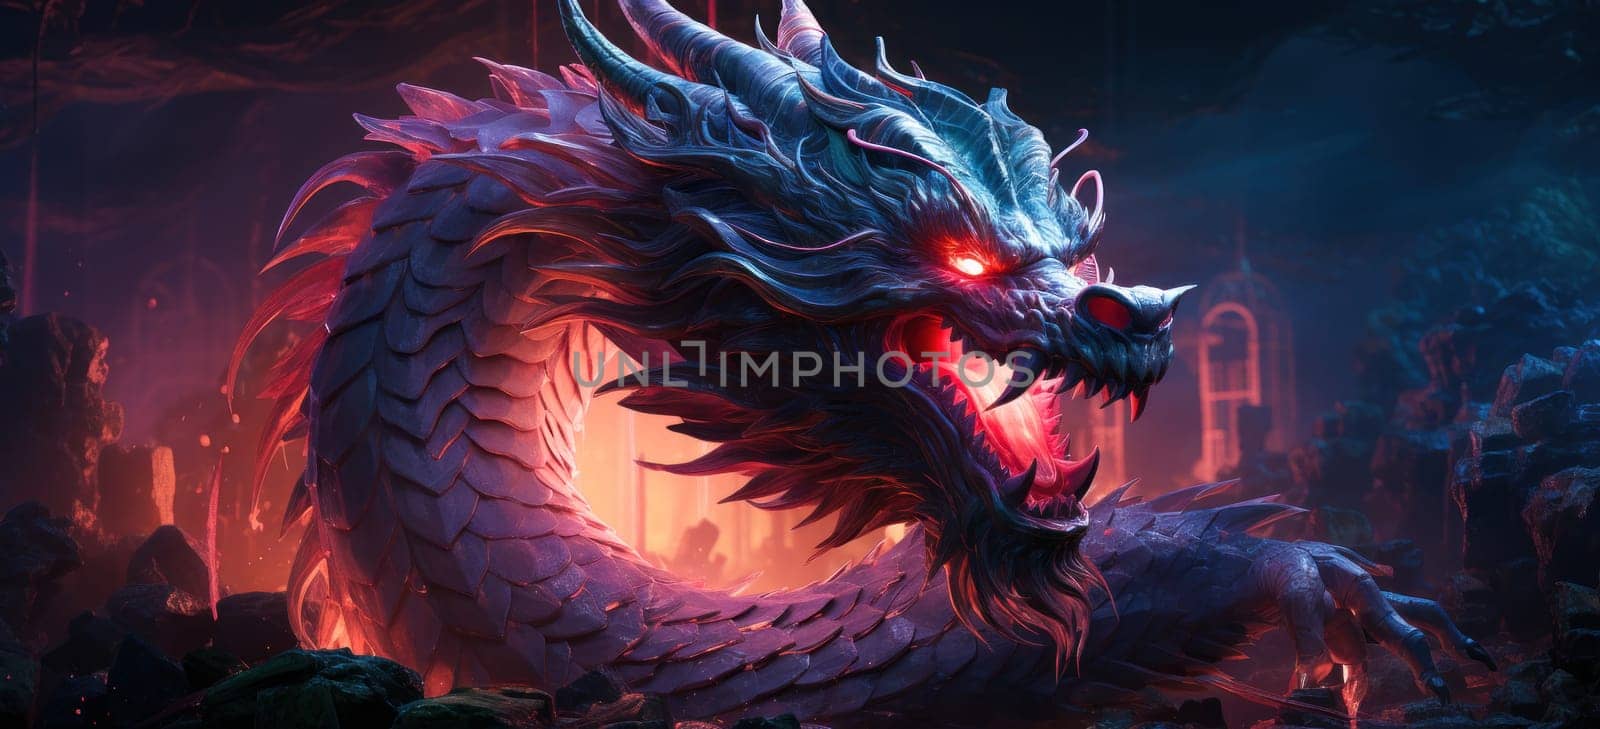 An impressive wall print featuring a spectacular and adorable dragon in radiant red and purple tones is the perfect complement for fans of mythical creatures and fantasy art..